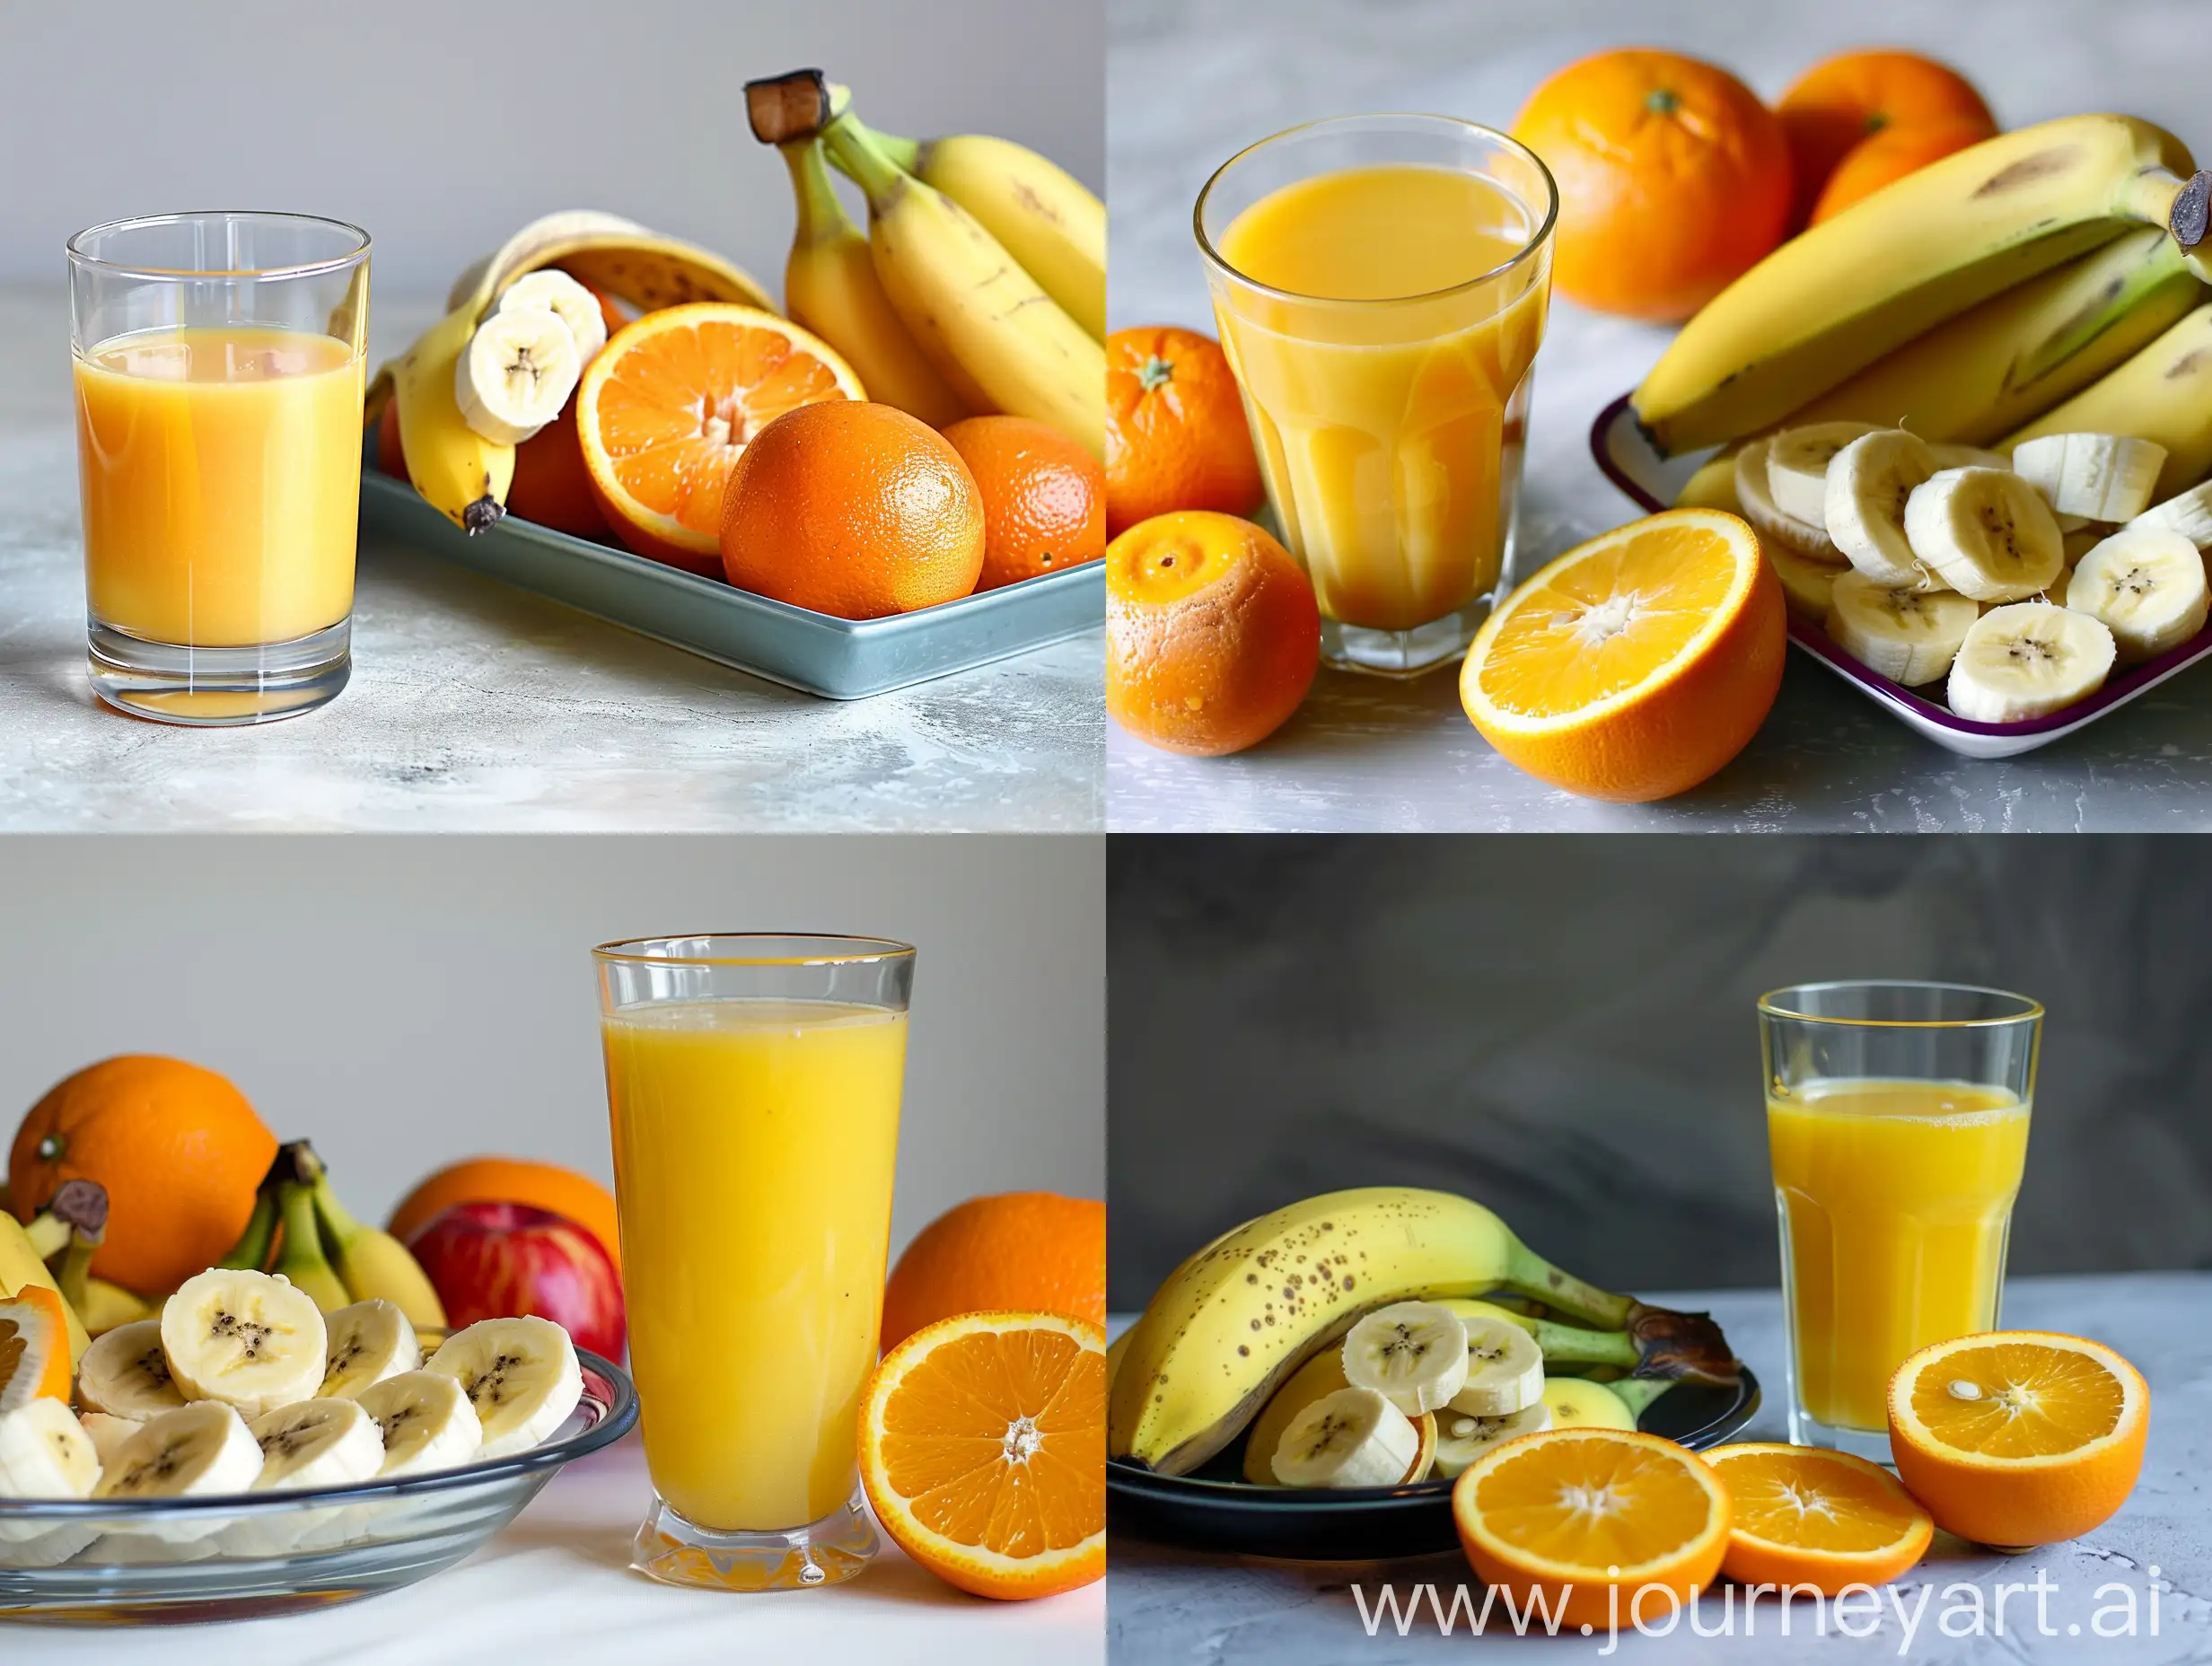 Photo of a glass of banana and orange juice next to banana and orange fruits in a serving dish